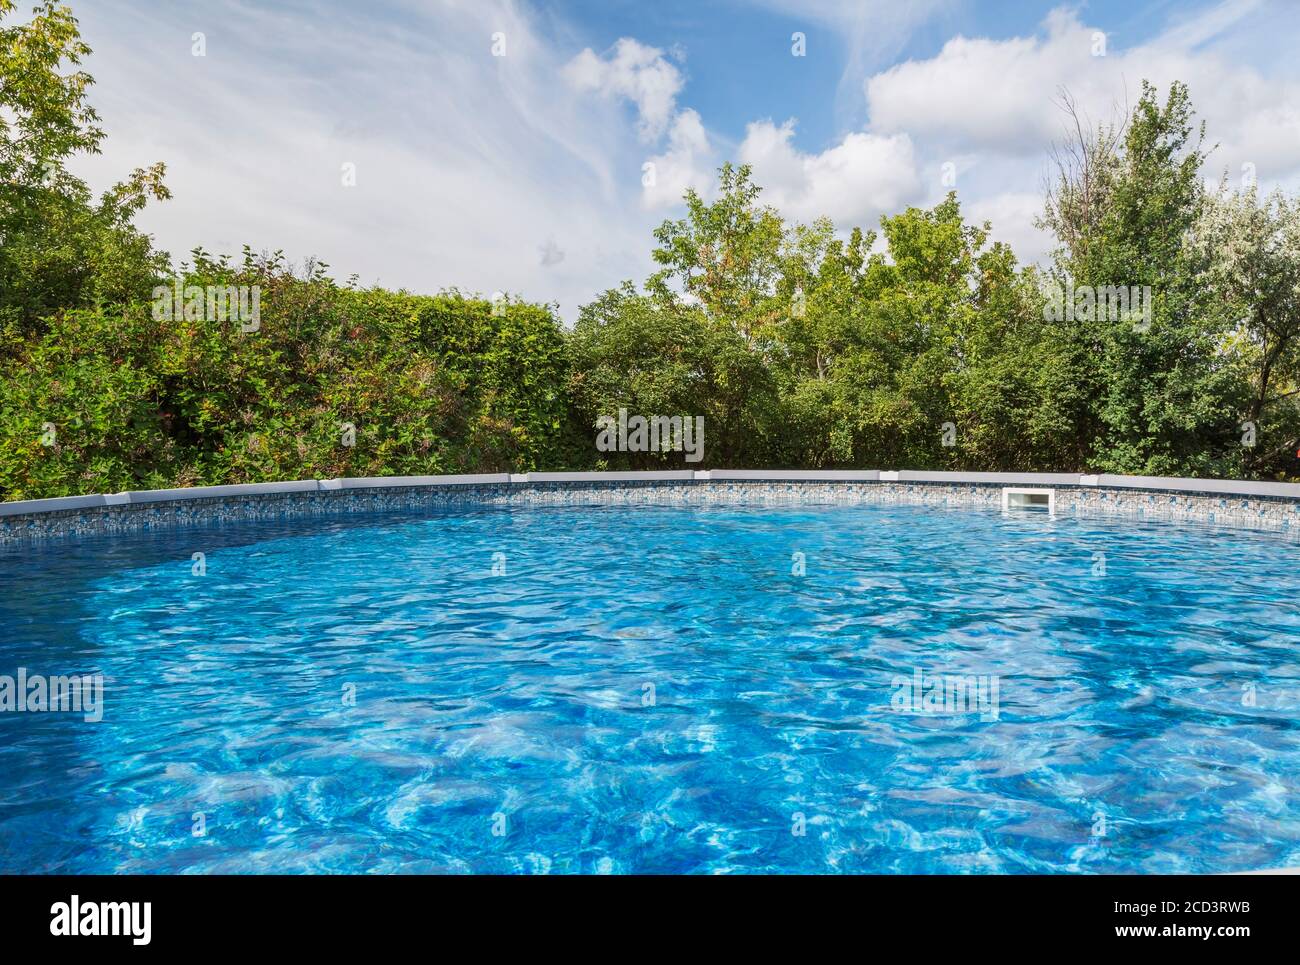 Outdoor pool surrounded by deciduous trees in residential backyard. Stock Photo